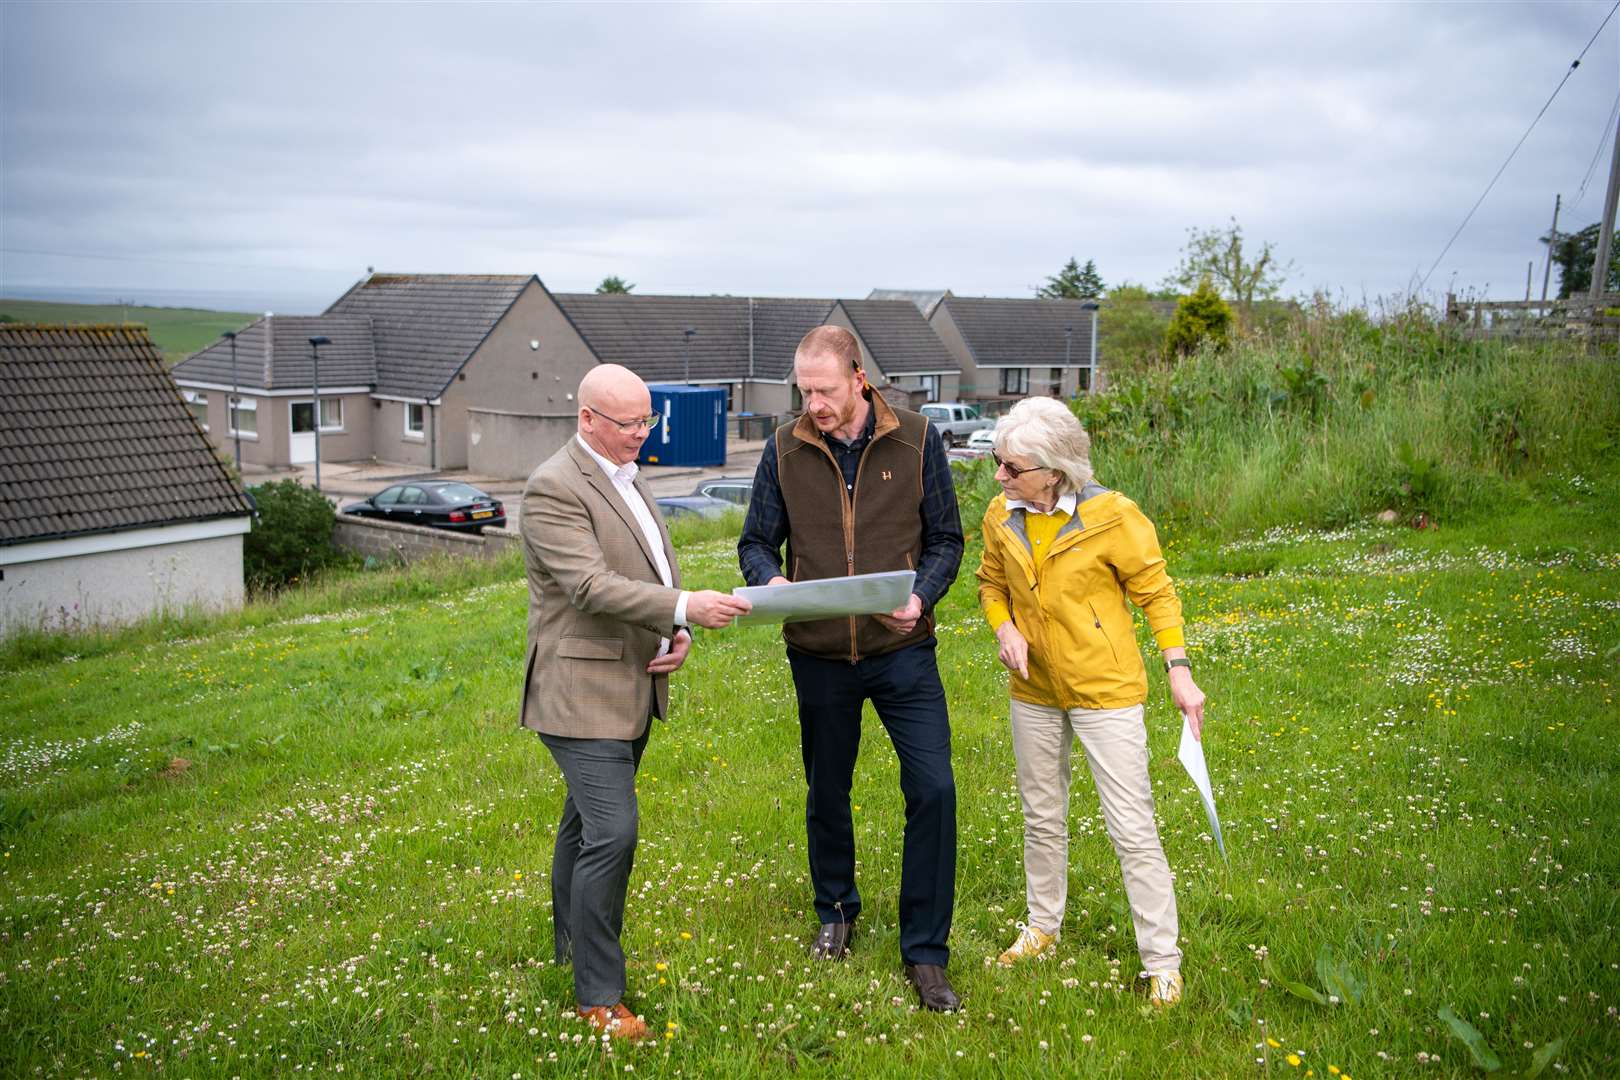 Daniel Macleod with representatives of SSE at the site of the Dunbeath and District Centre development.